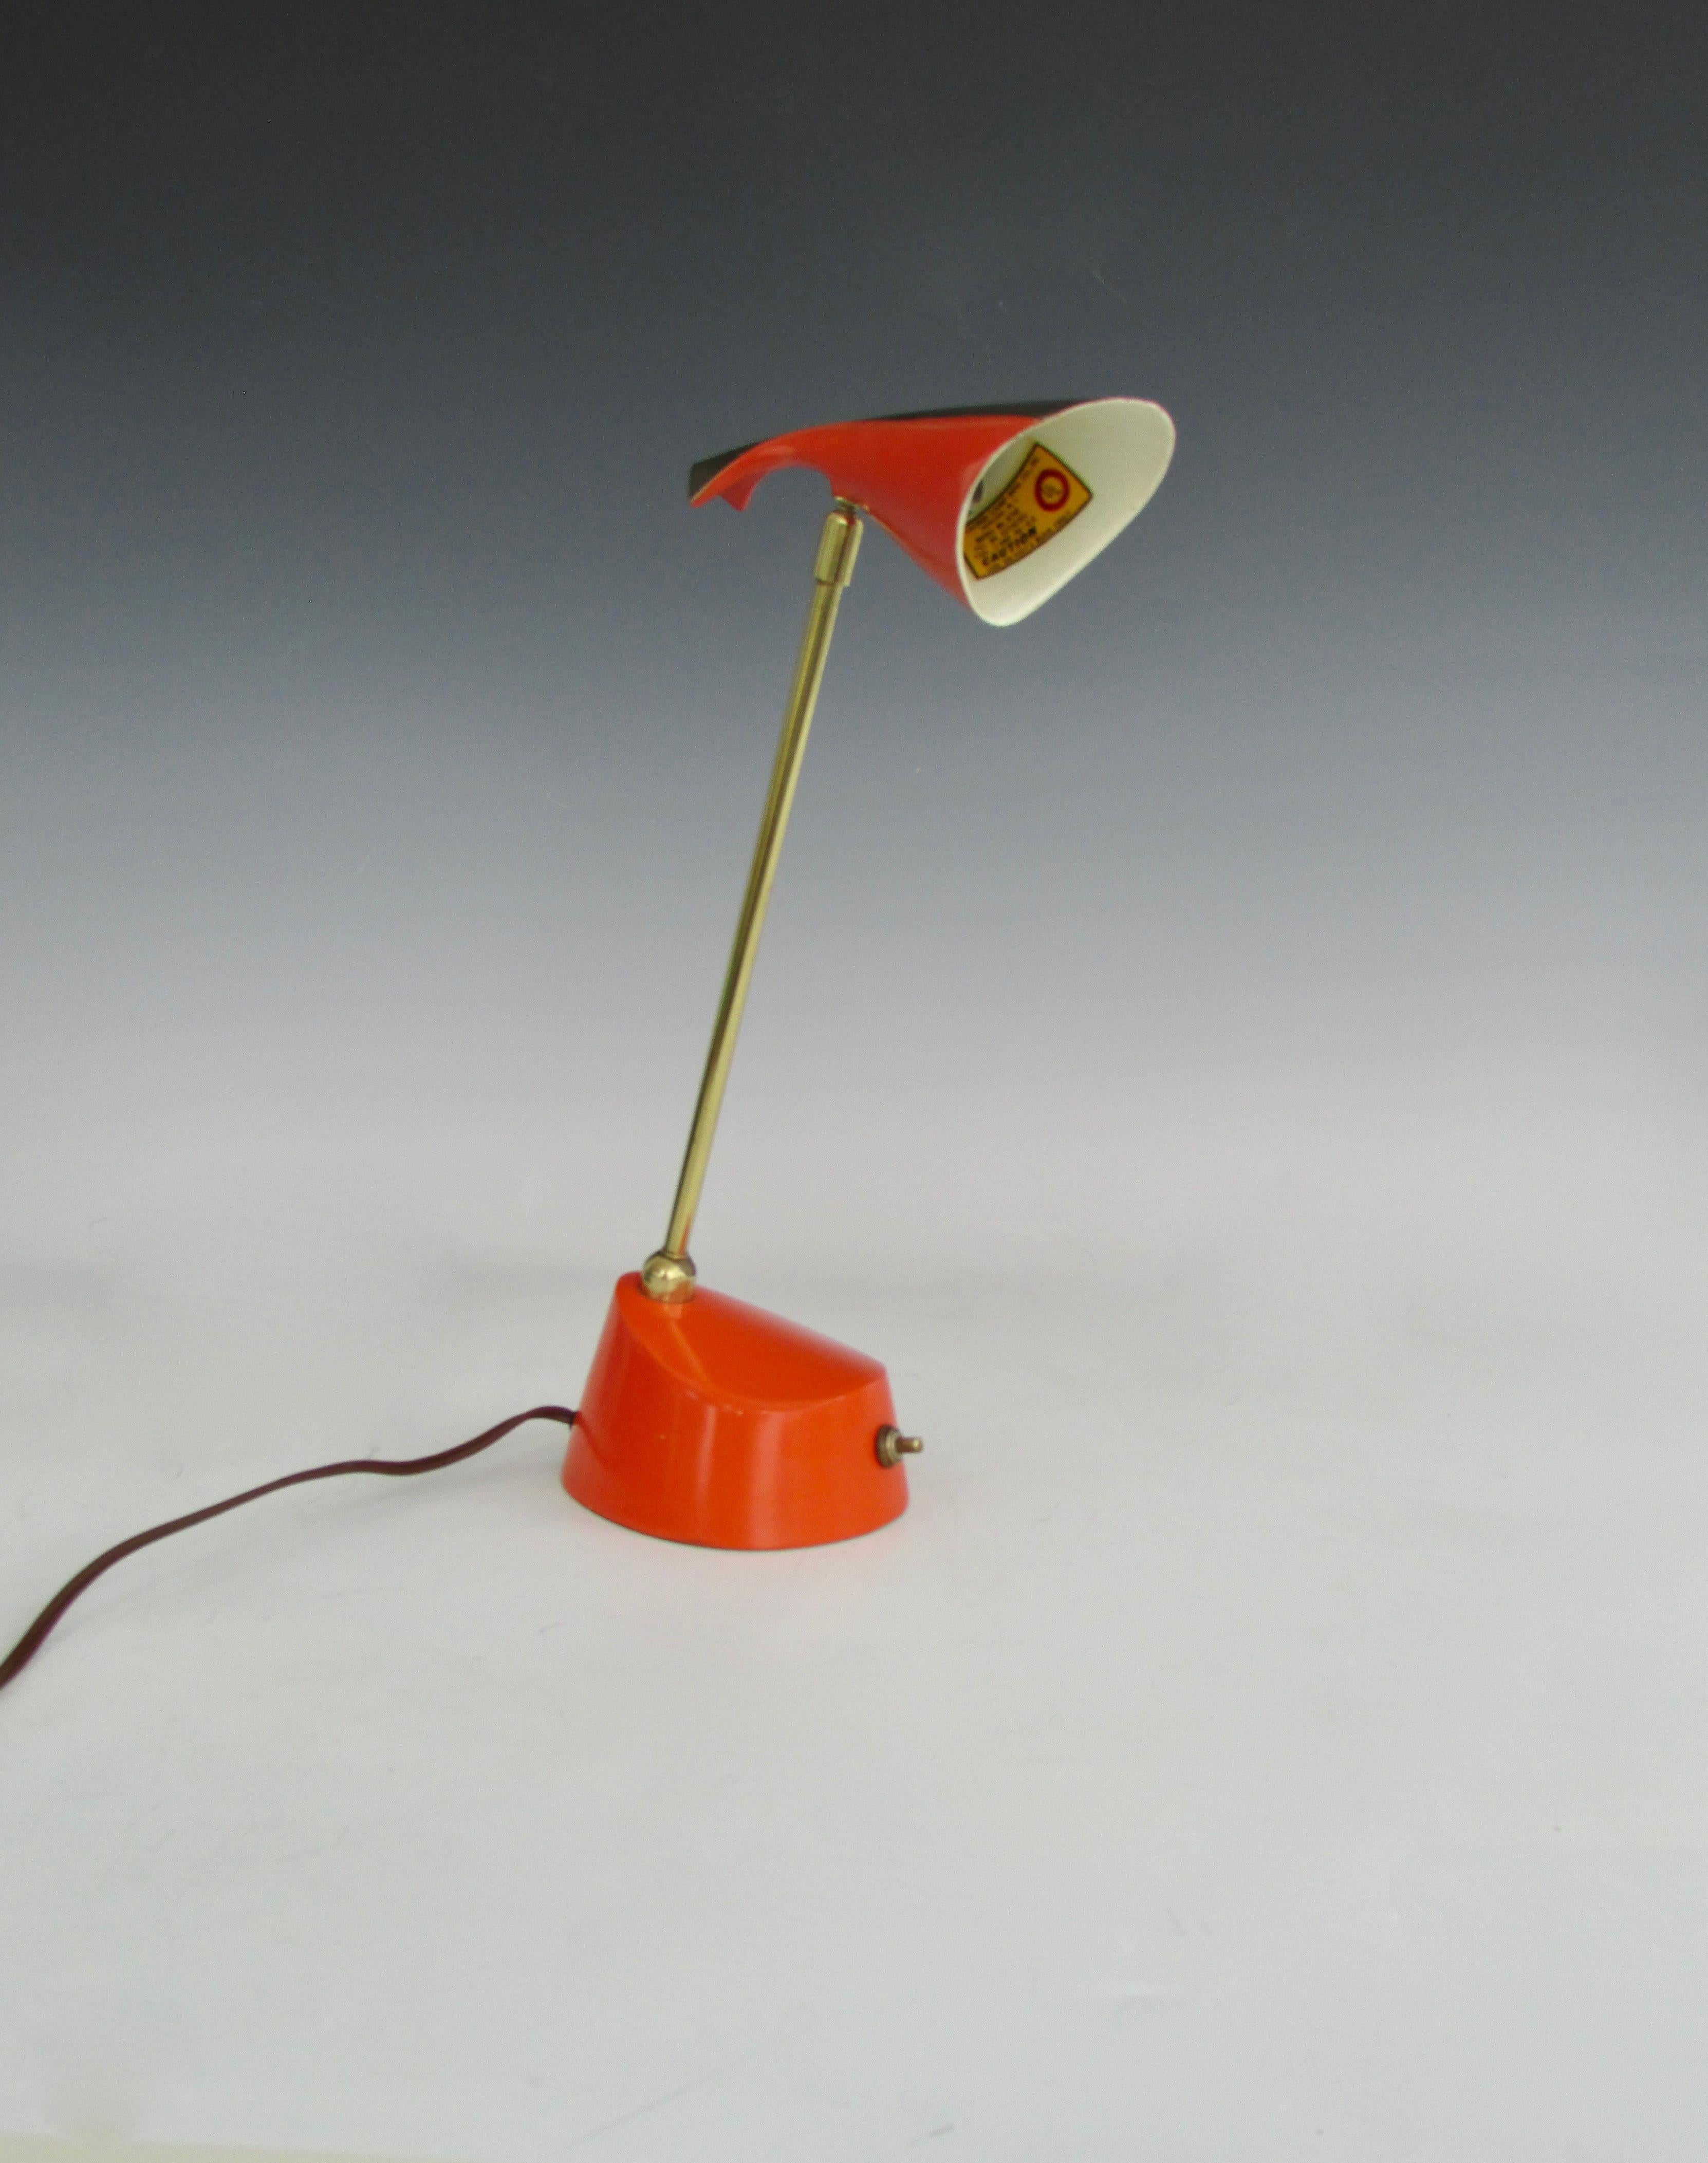 Laurel lamp co. NJ desk or task lamp in original bright orange red finish with gold trim. weighted base supports multi adjustable brass shaft supporting space age cone shade .Loop hook on underside to enable wall hanging. Retains excellent original